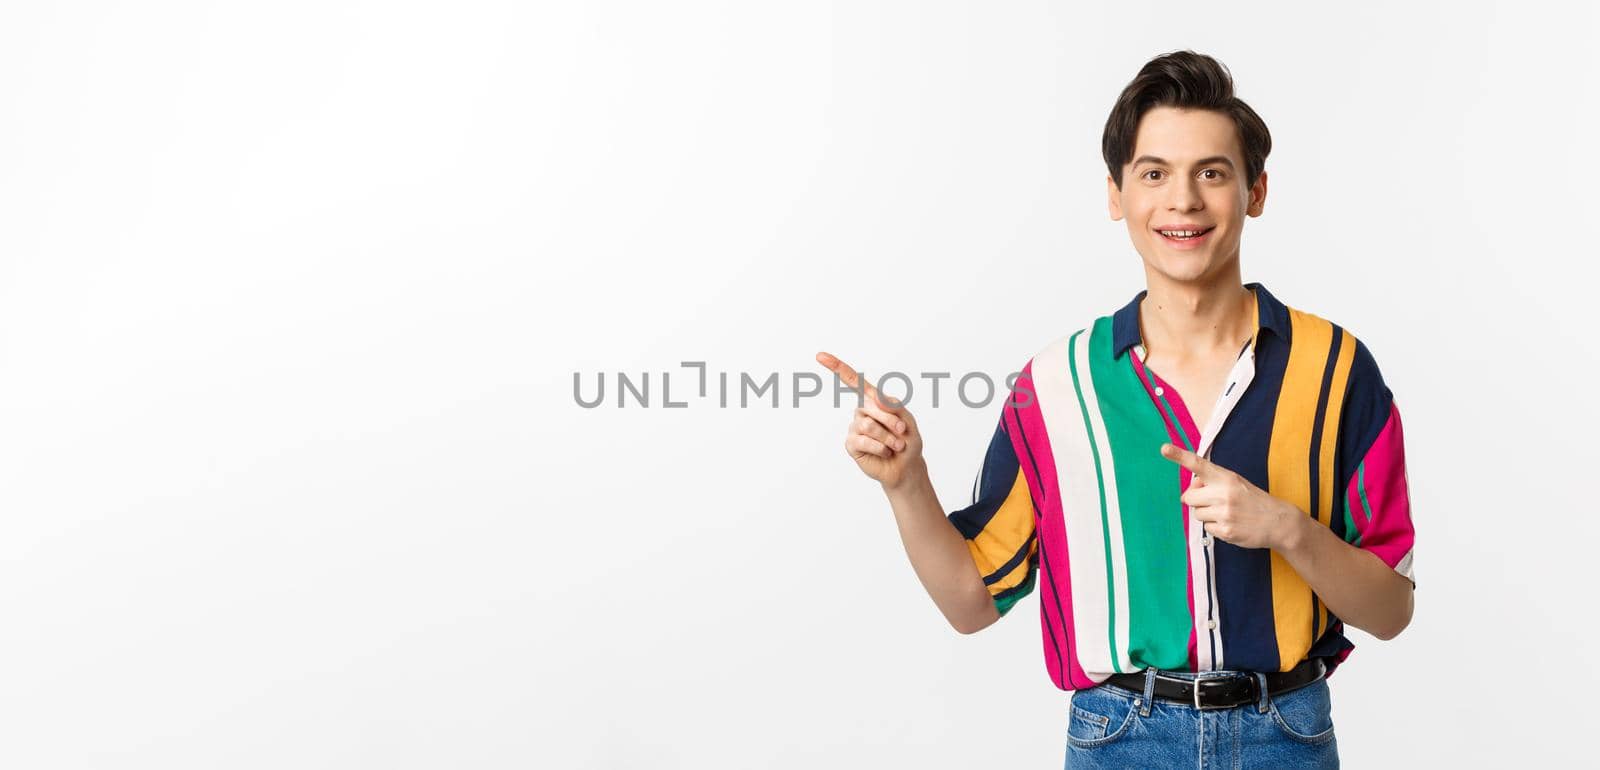 Portrait of handsome young man in stylish clothes, pointing fingers left and smiling, showing advertisement, standing over white background.